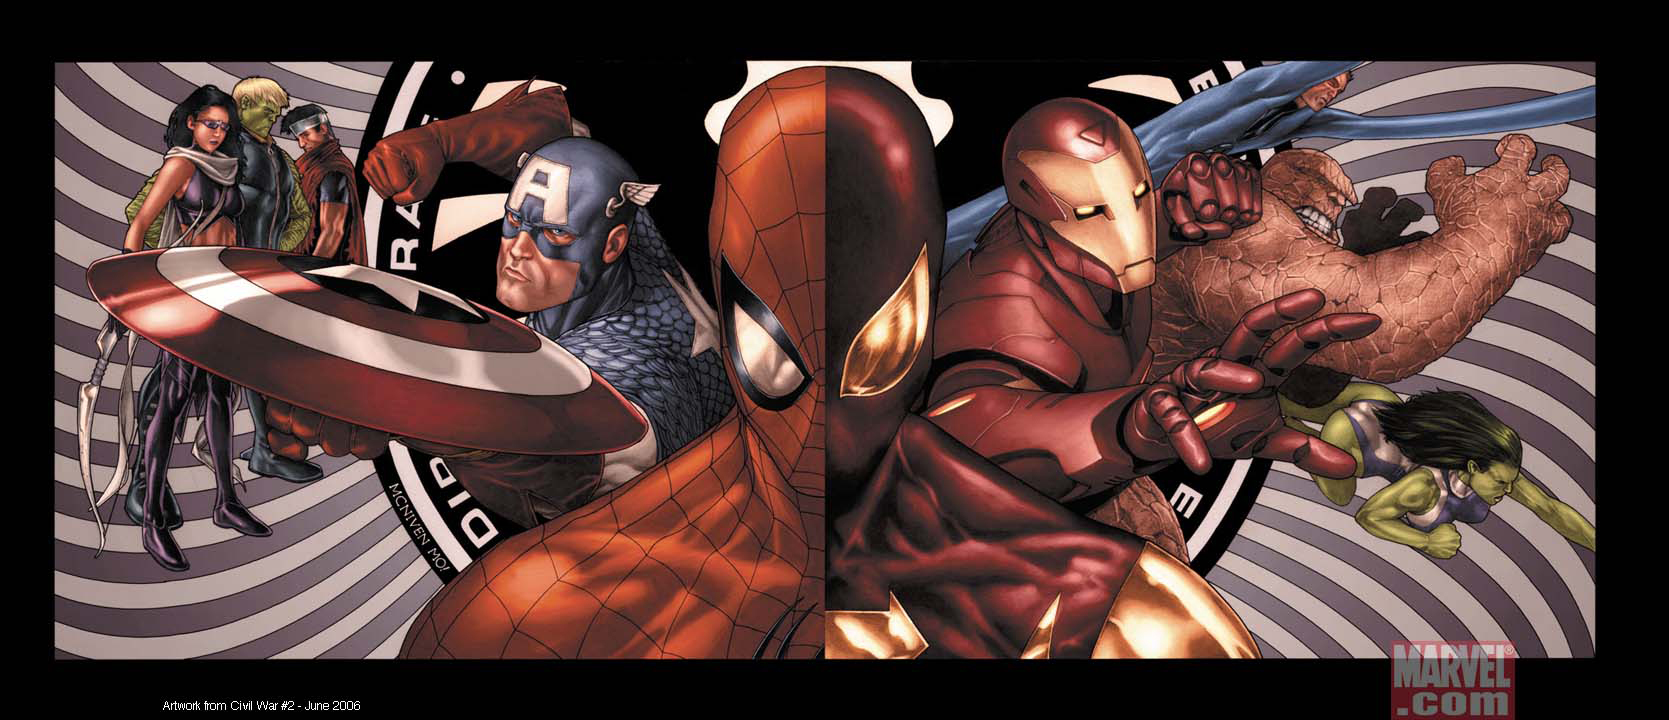 Marvel superheroes in action: Iron Man, Captain America, Thing, and Spider-Man, united in a fantastic desktop wallpaper.